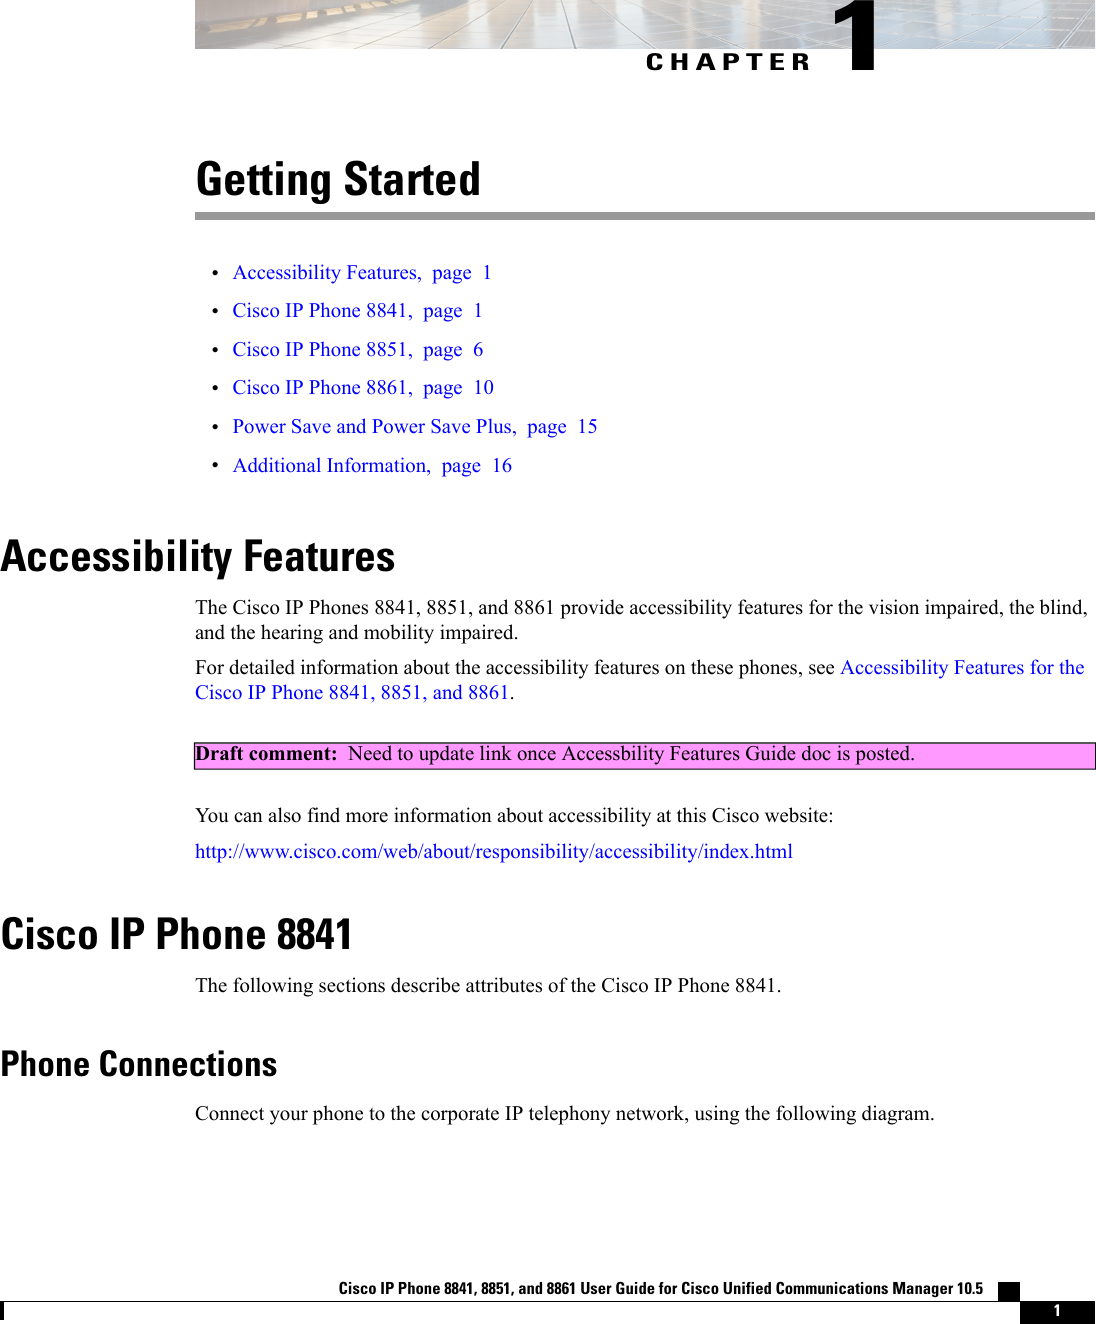 CHAPTER 1Getting Started•Accessibility Features, page 1•Cisco IP Phone 8841, page 1•Cisco IP Phone 8851, page 6•Cisco IP Phone 8861, page 10•Power Save and Power Save Plus, page 15•Additional Information, page 16Accessibility FeaturesThe Cisco IP Phones 8841, 8851, and 8861 provide accessibility features for the vision impaired, the blind,and the hearing and mobility impaired.For detailed information about the accessibility features on these phones, see Accessibility Features for theCisco IP Phone 8841, 8851, and 8861.Draft comment: Need to update link once Accessbility Features Guide doc is posted.You can also find more information about accessibility at this Cisco website:http://www.cisco.com/web/about/responsibility/accessibility/index.htmlCisco IP Phone 8841The following sections describe attributes of the Cisco IP Phone 8841.Phone ConnectionsConnect your phone to the corporate IP telephony network, using the following diagram.Cisco IP Phone 8841, 8851, and 8861 User Guide for Cisco Unified Communications Manager 10.5    1